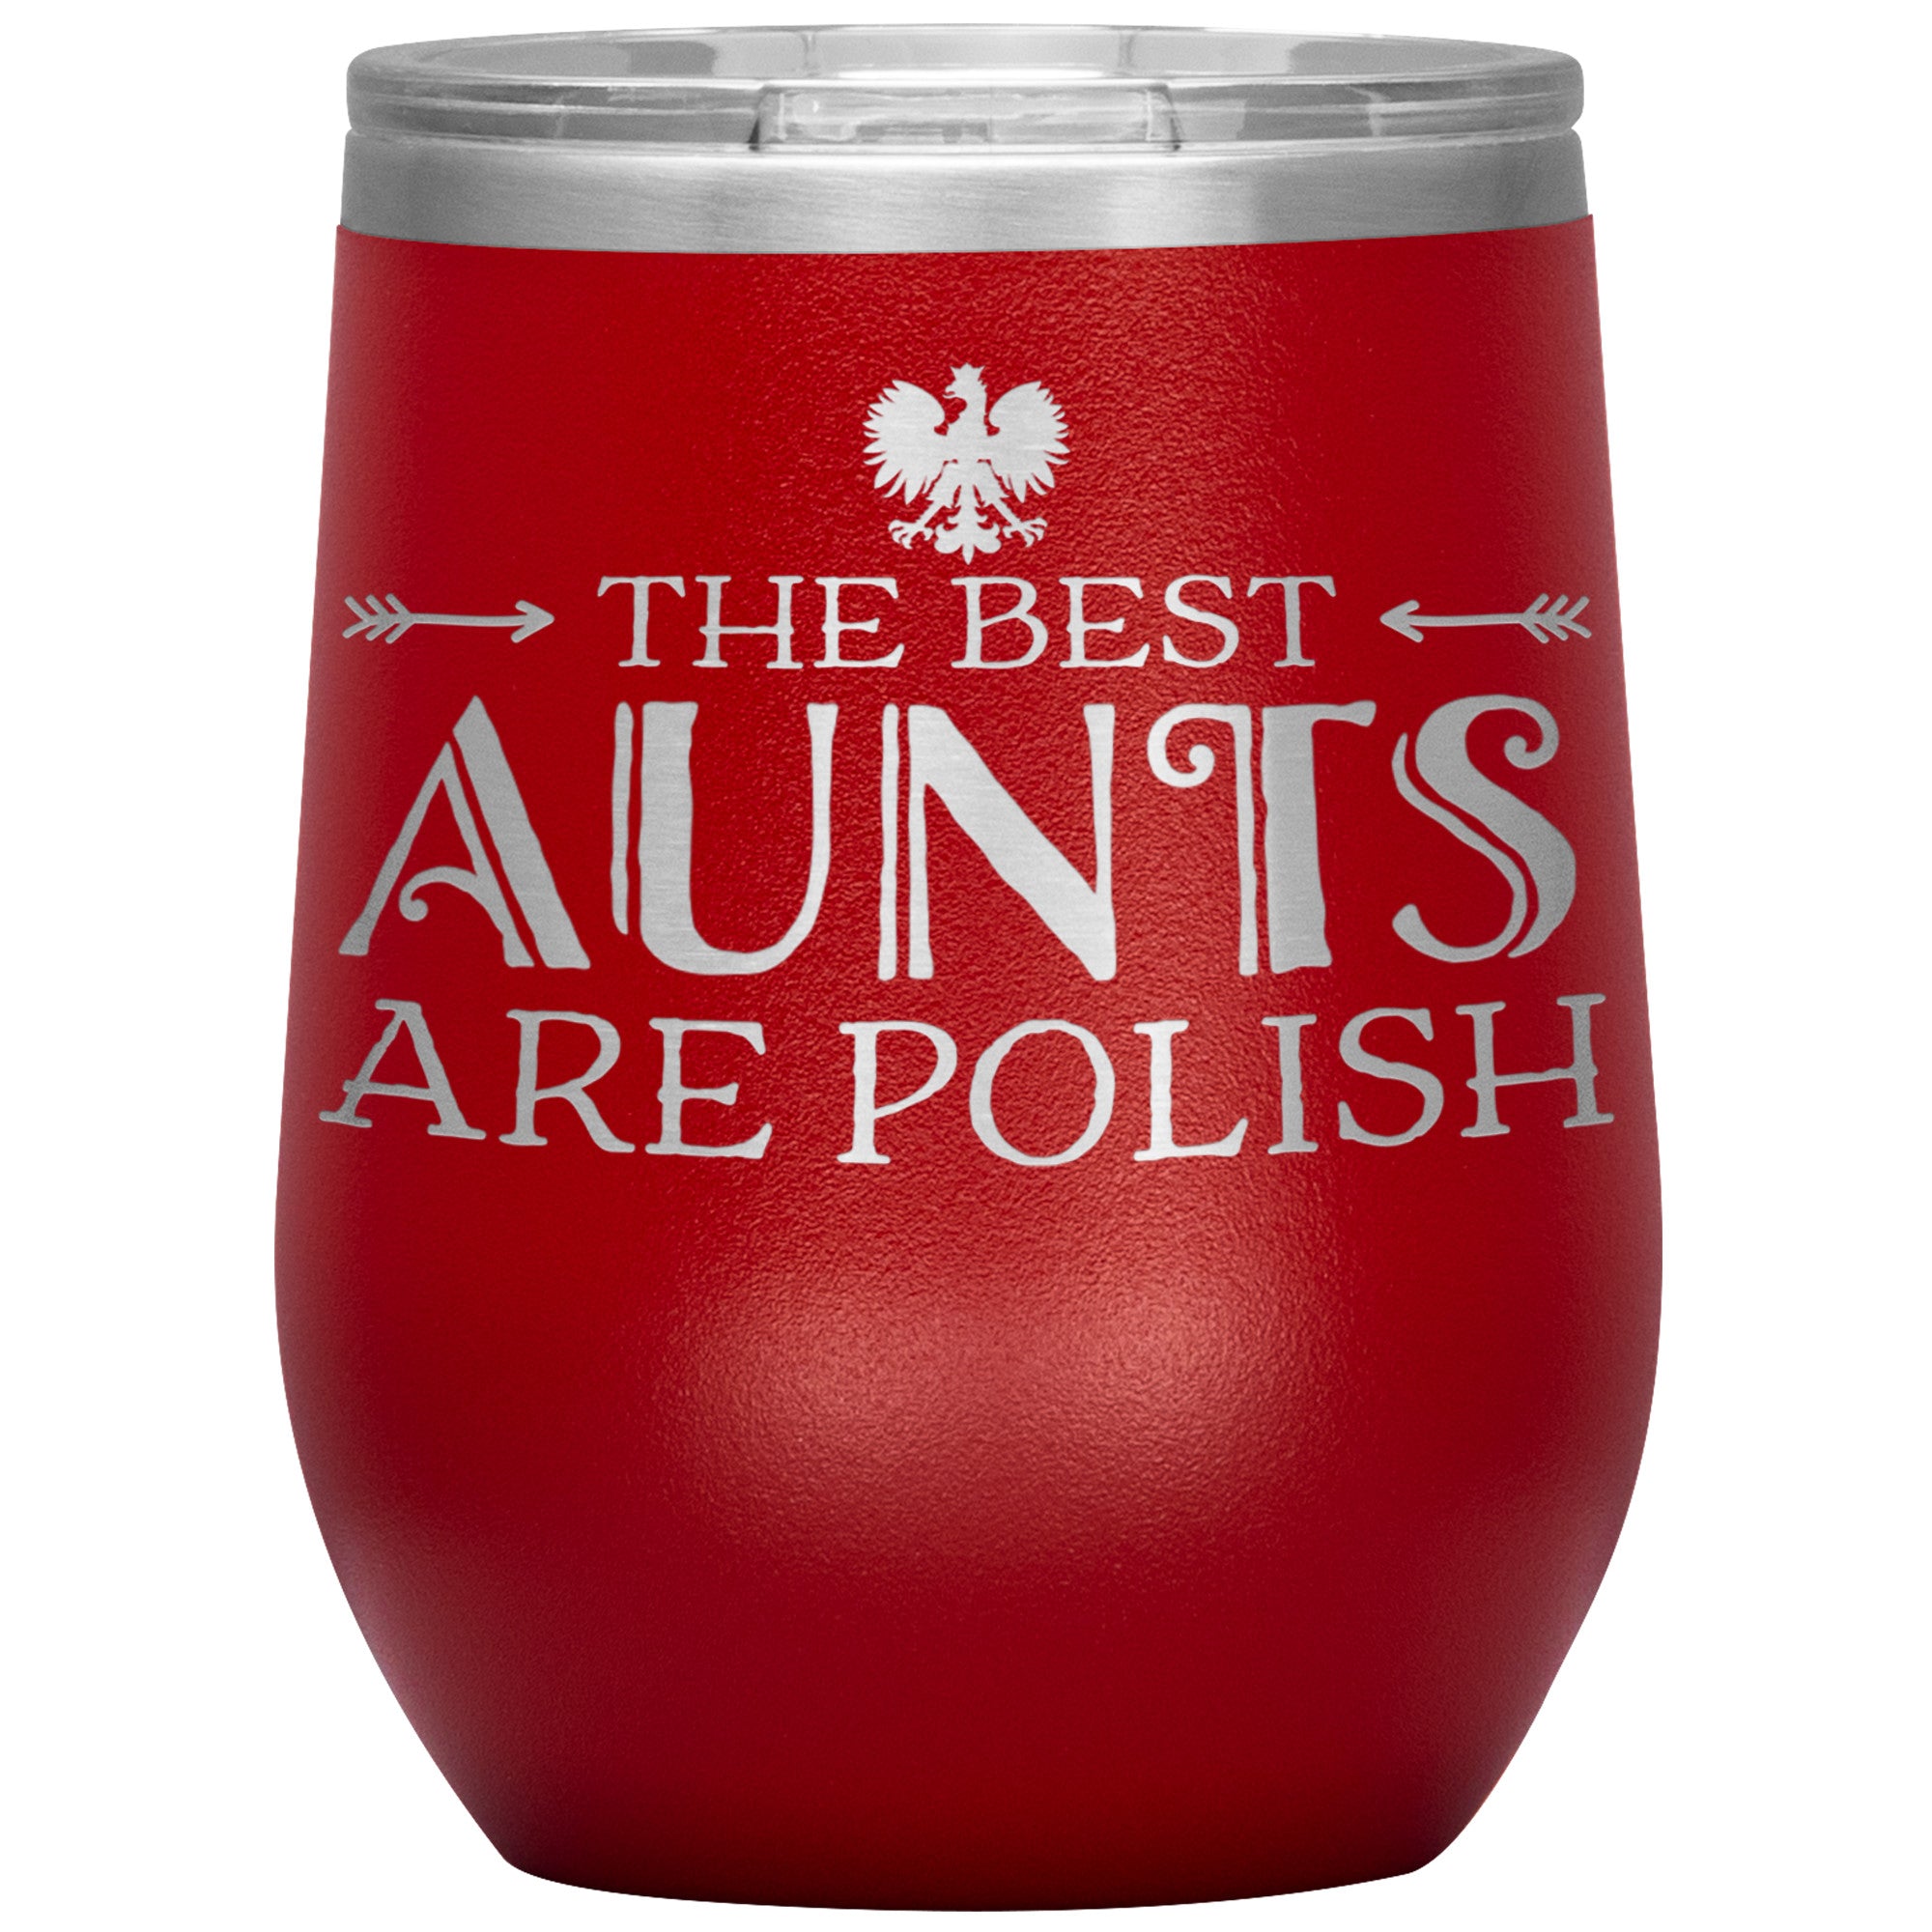 The Best Aunts Are Polish Insulated Wine Tumbler Tumblers teelaunch Red  